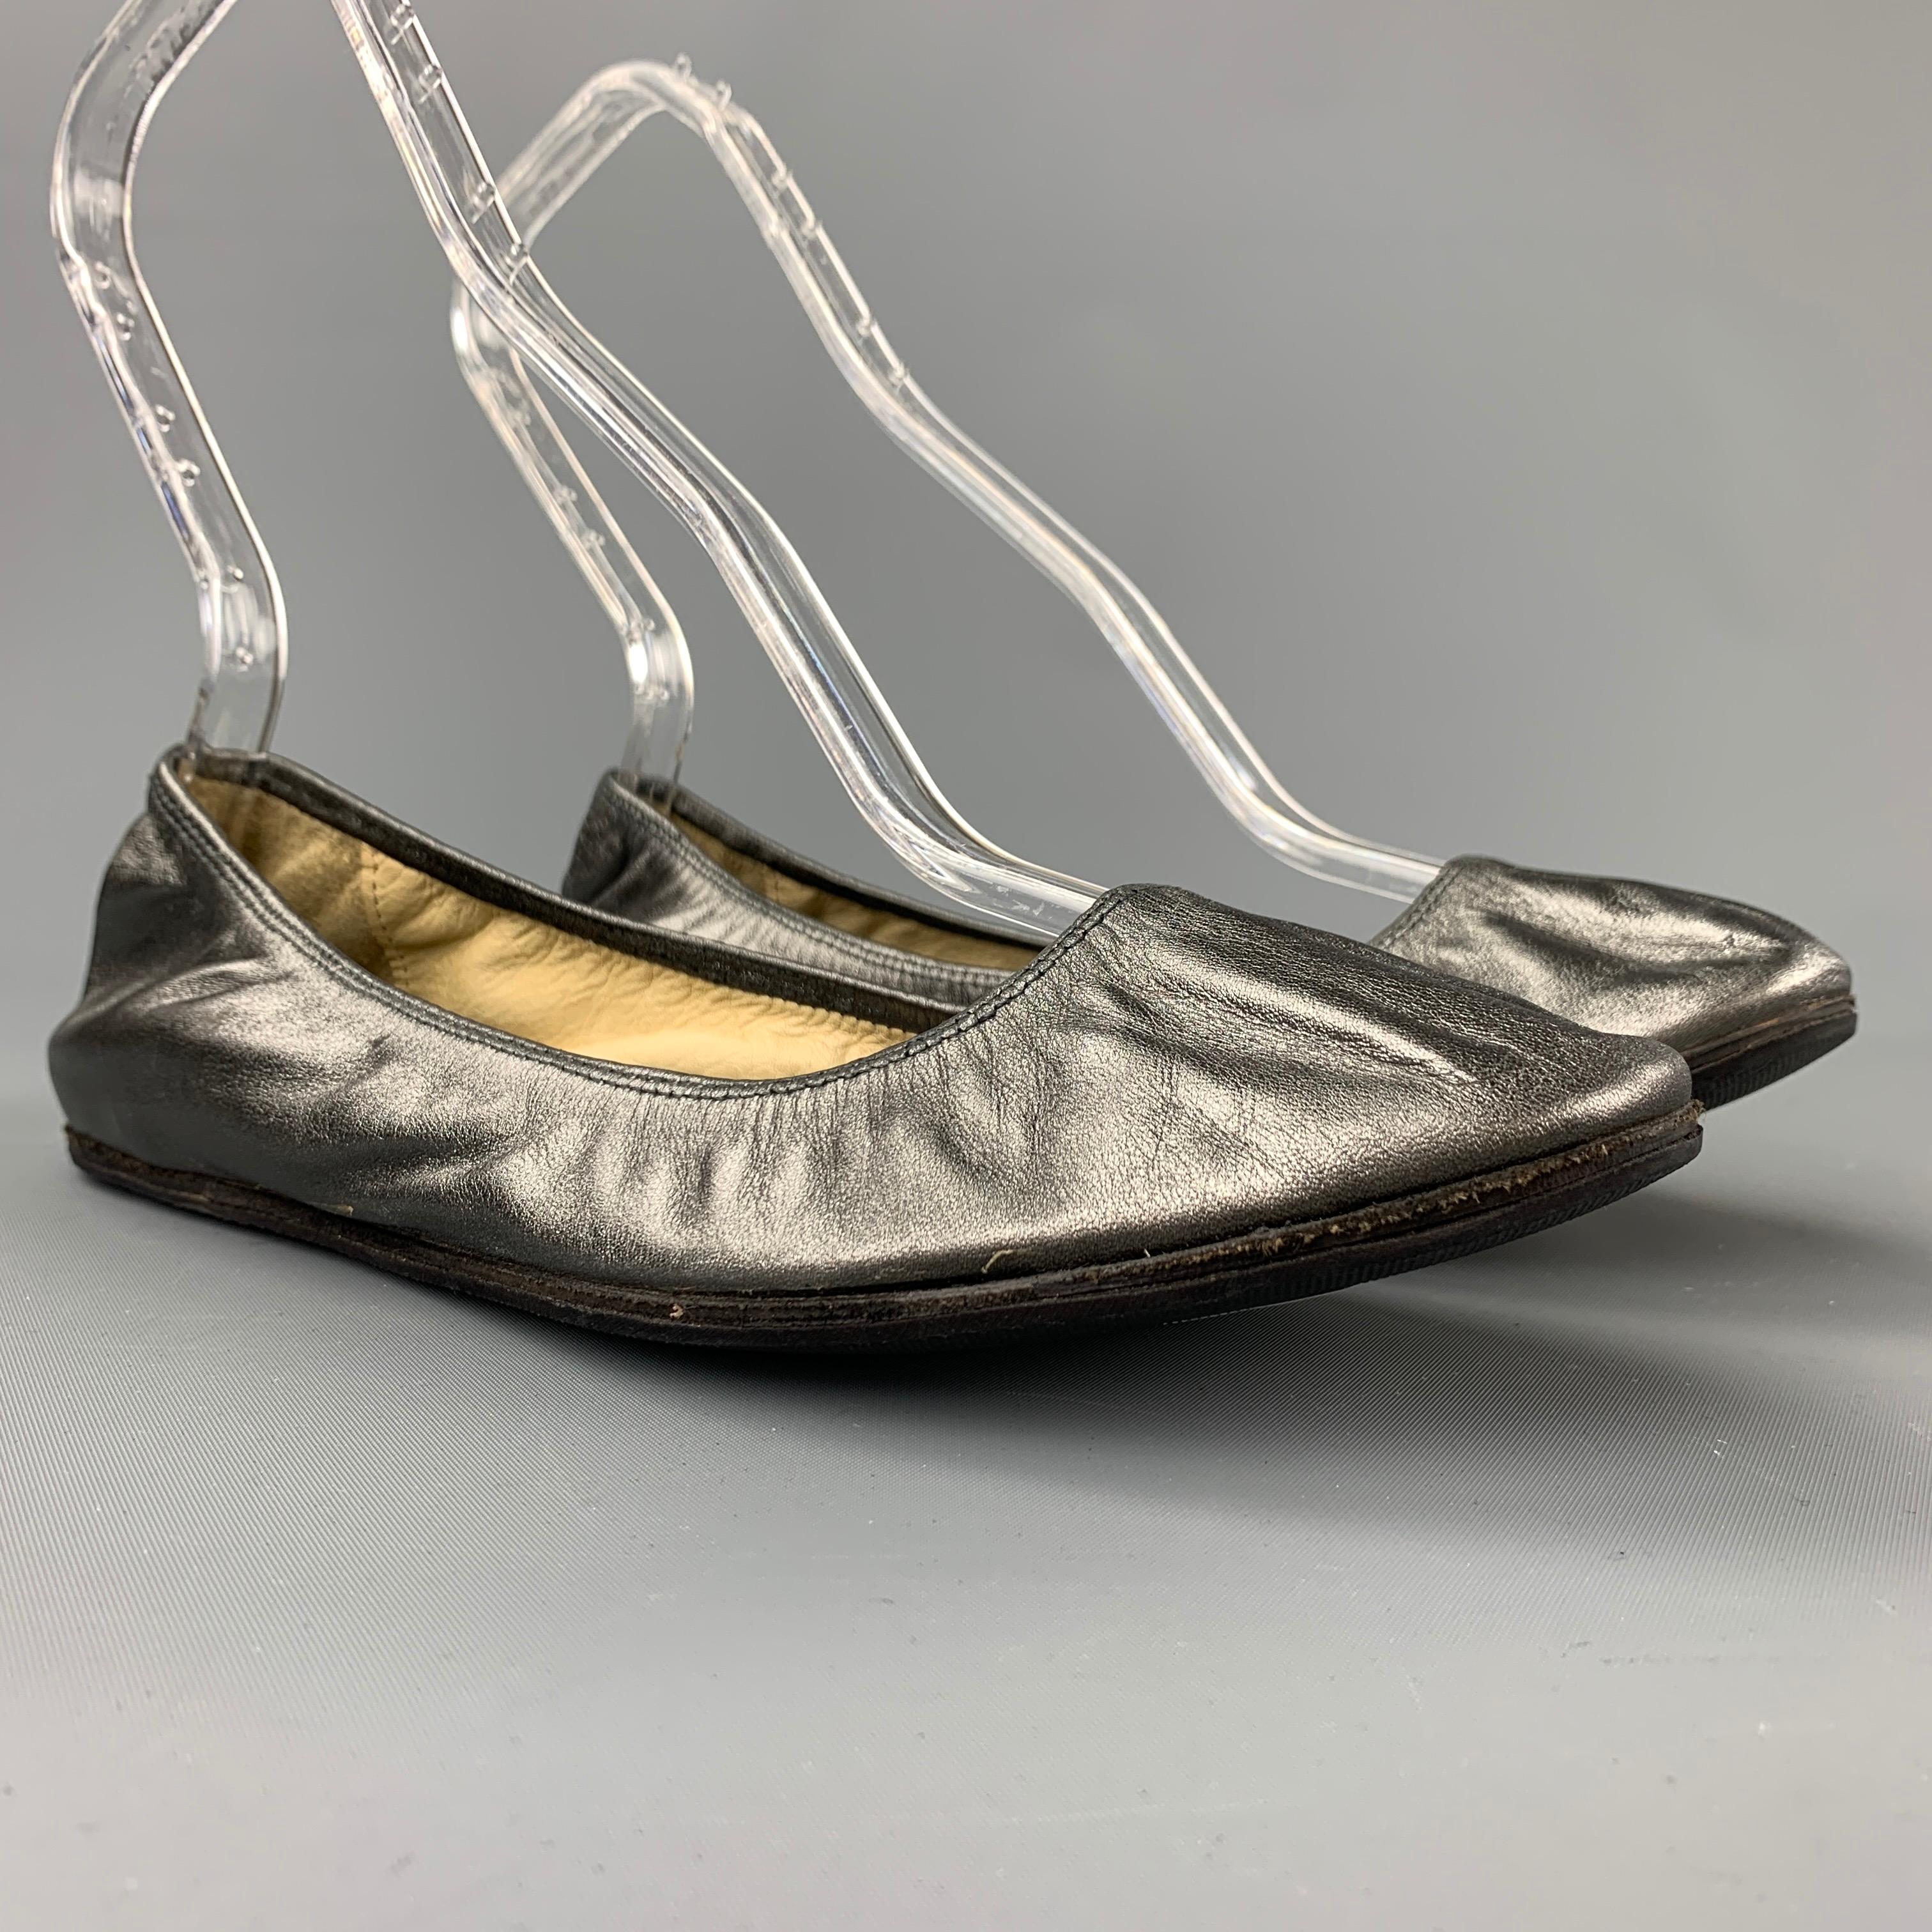 LANVIN 2007 flats comes in a silver leather featuring a ballet style. 

Good Pre-Owned Condition.
Marked: No size visible

Outsole: 9.5 in. x 3 in. 